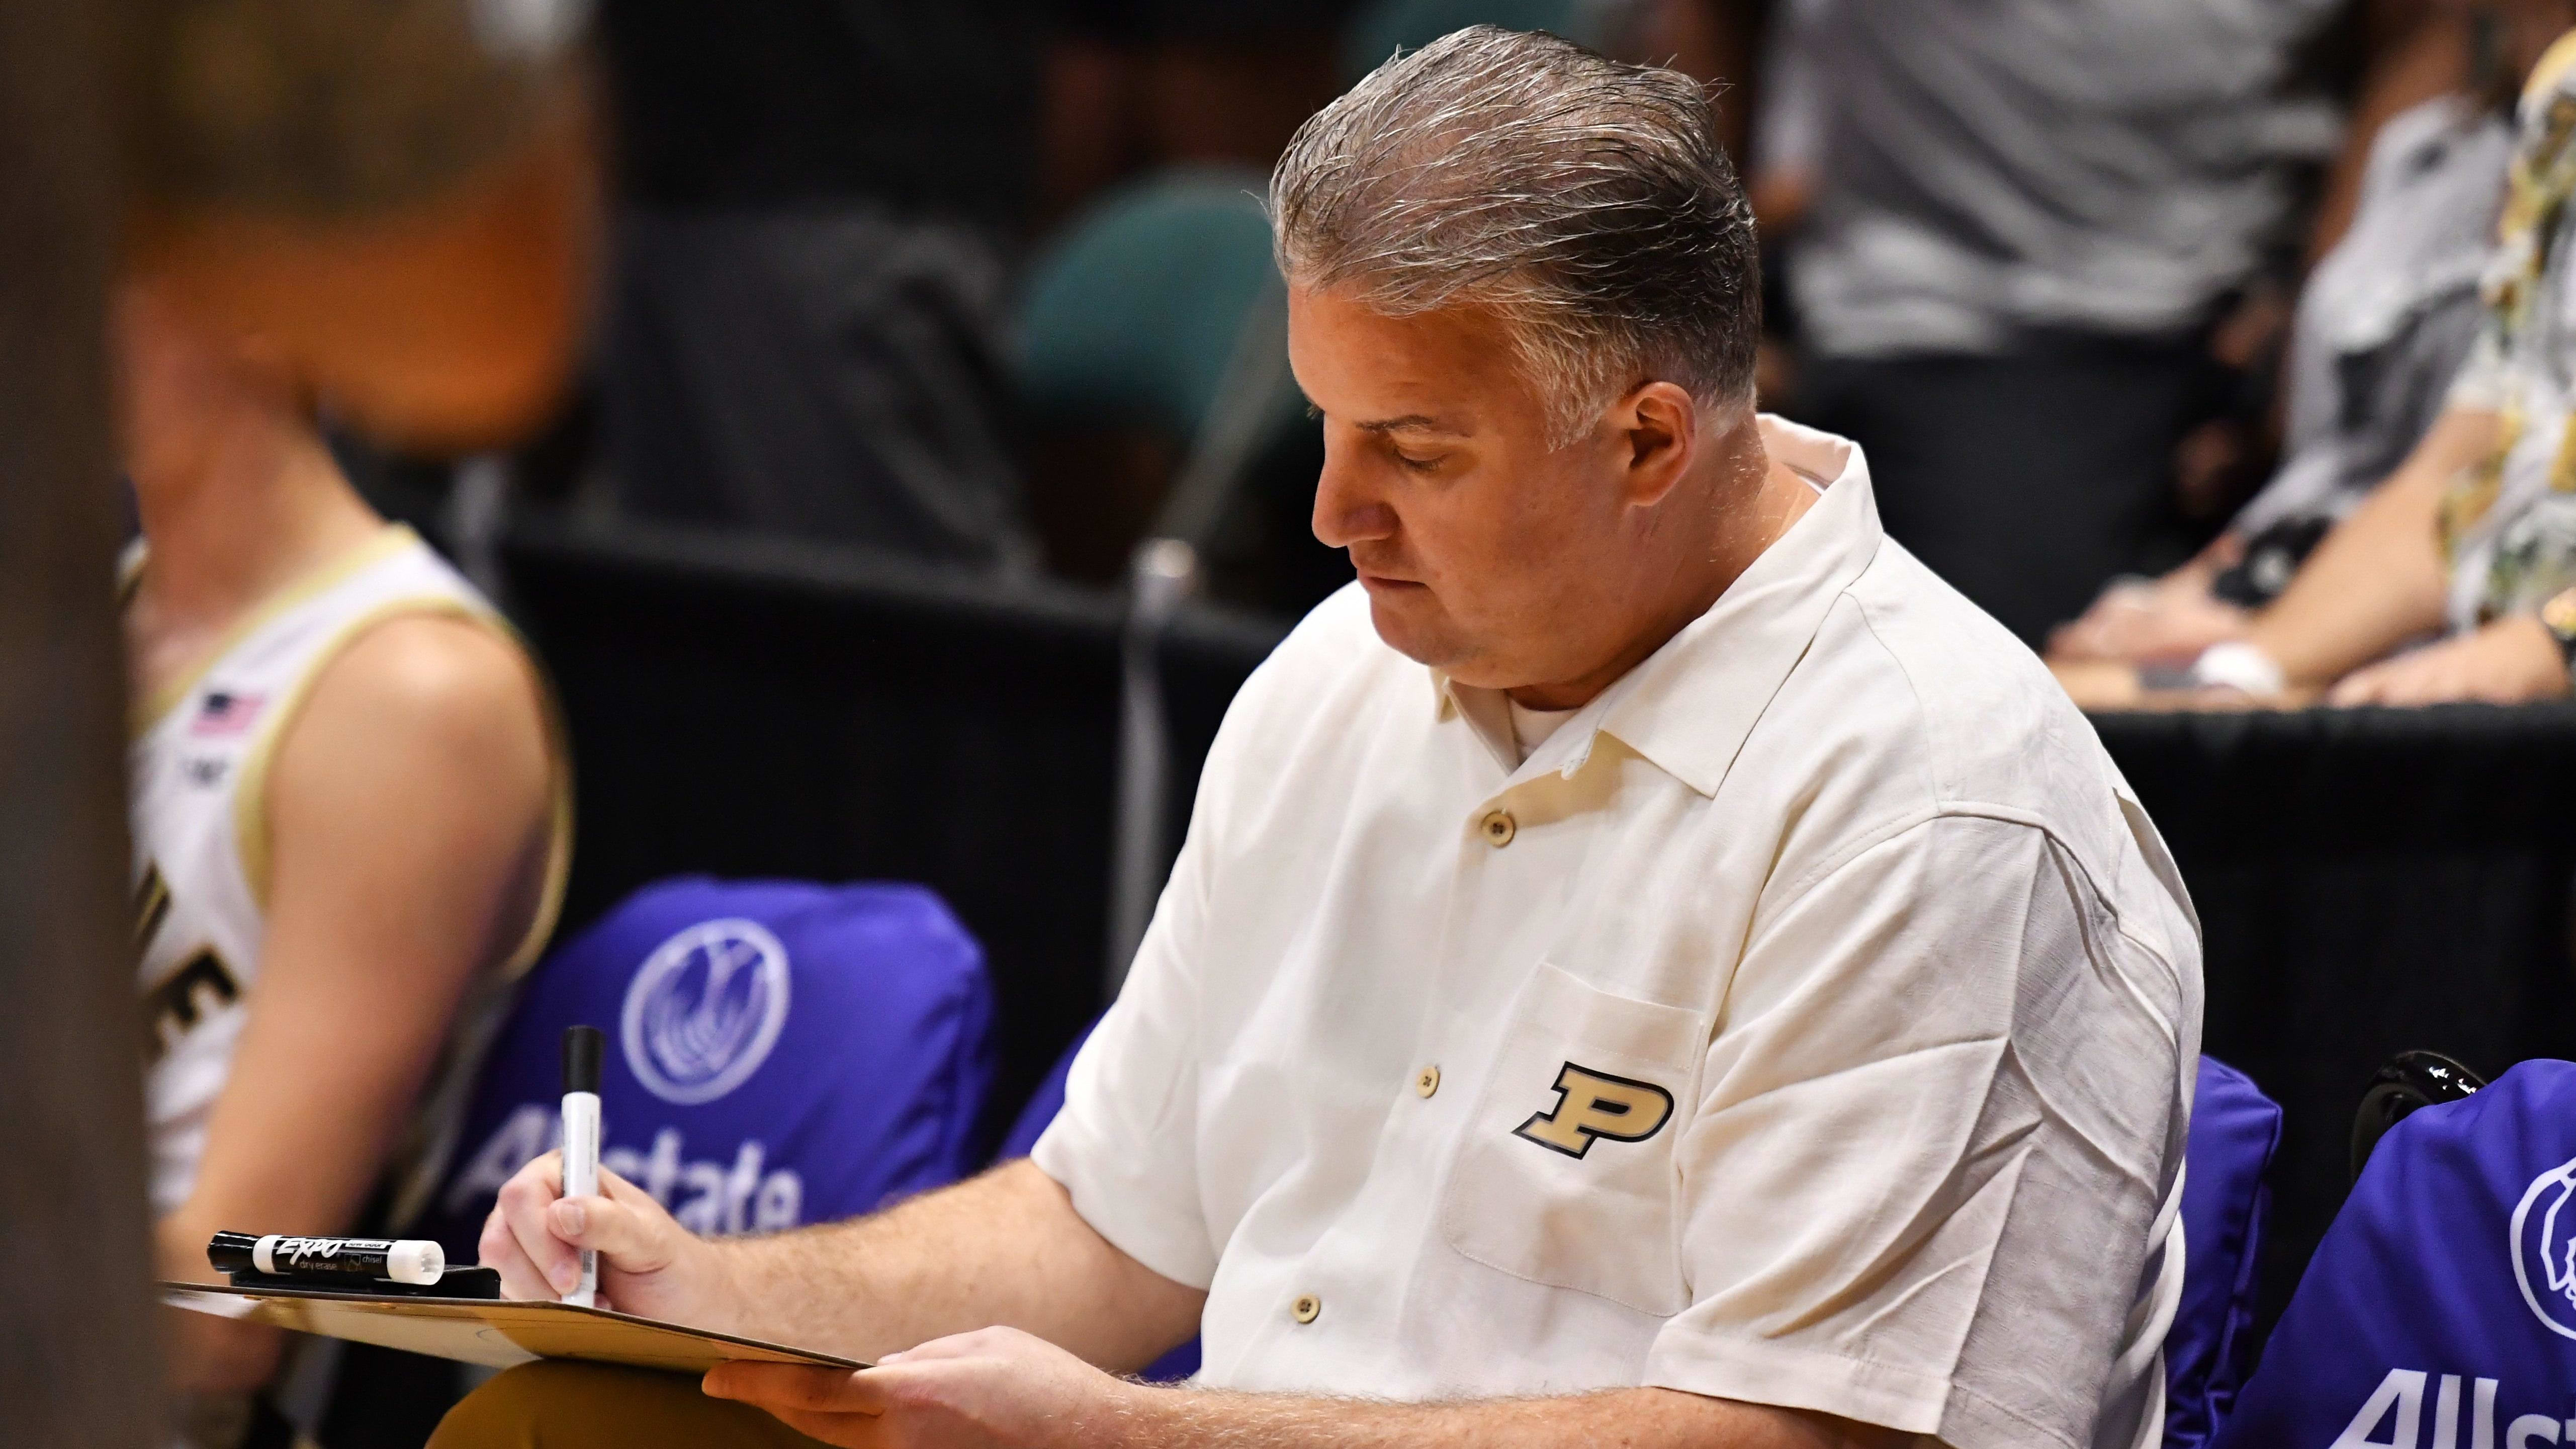 Purdue coach Matt Painter draws up a play against Tennessee last November in Hawaii. The two teams play again on Sunday.